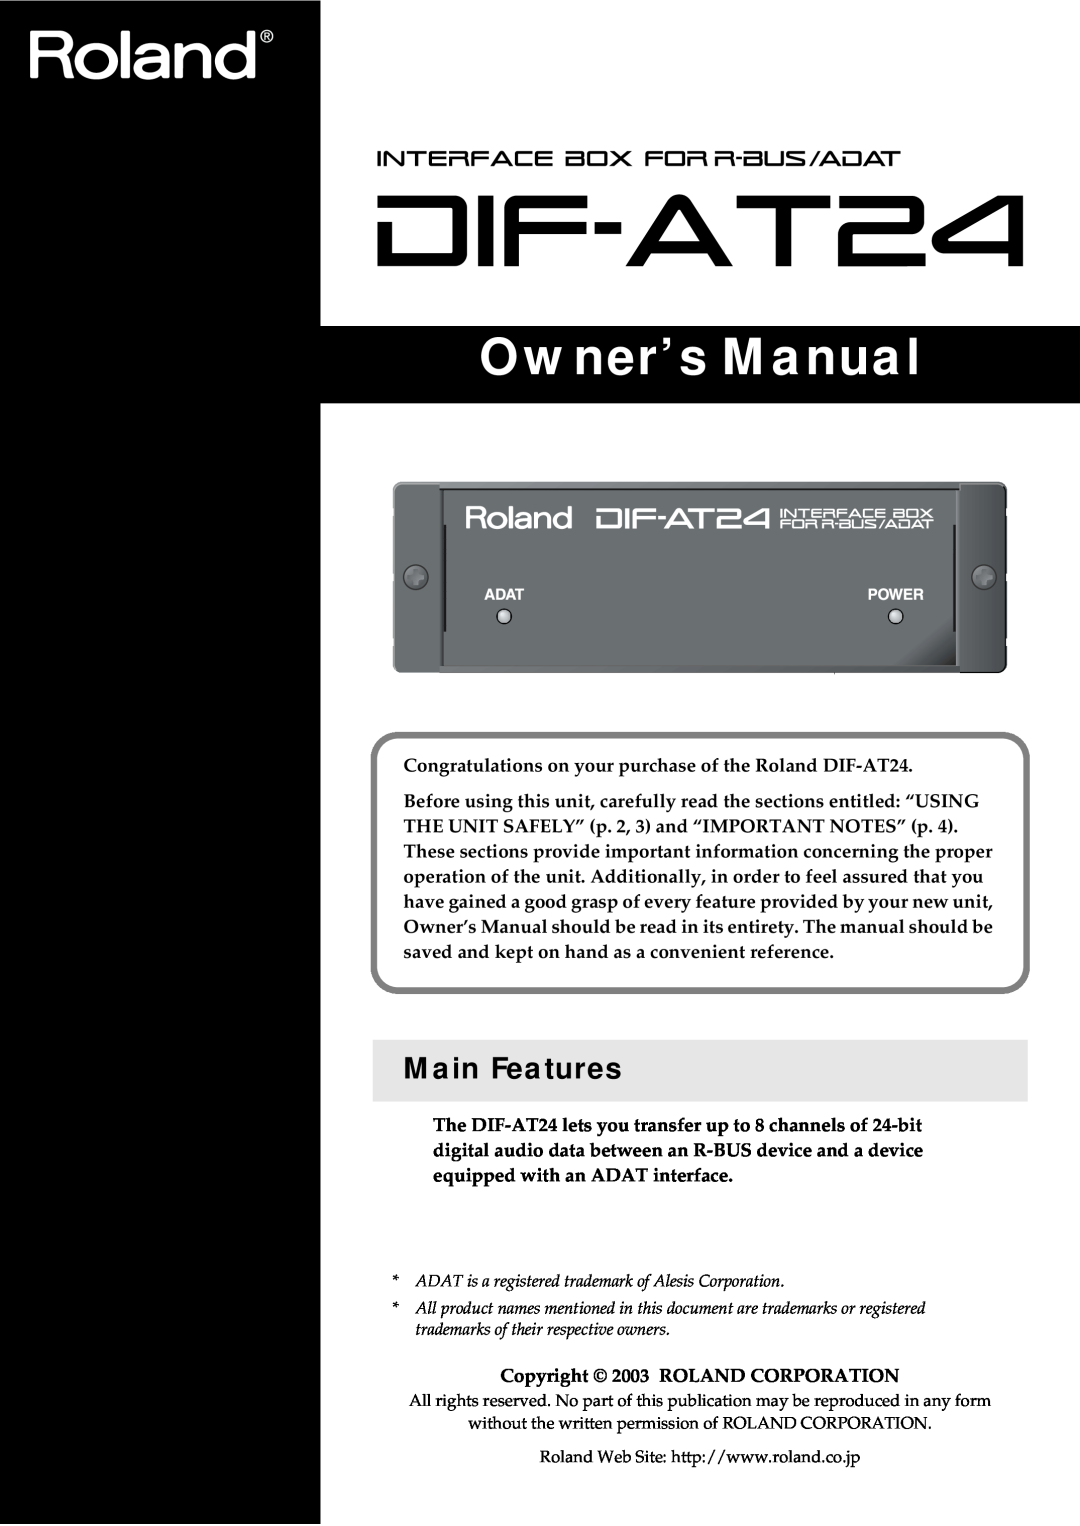 Roland DIF-AT24 owner manual Main Features, Owner’s Manual 